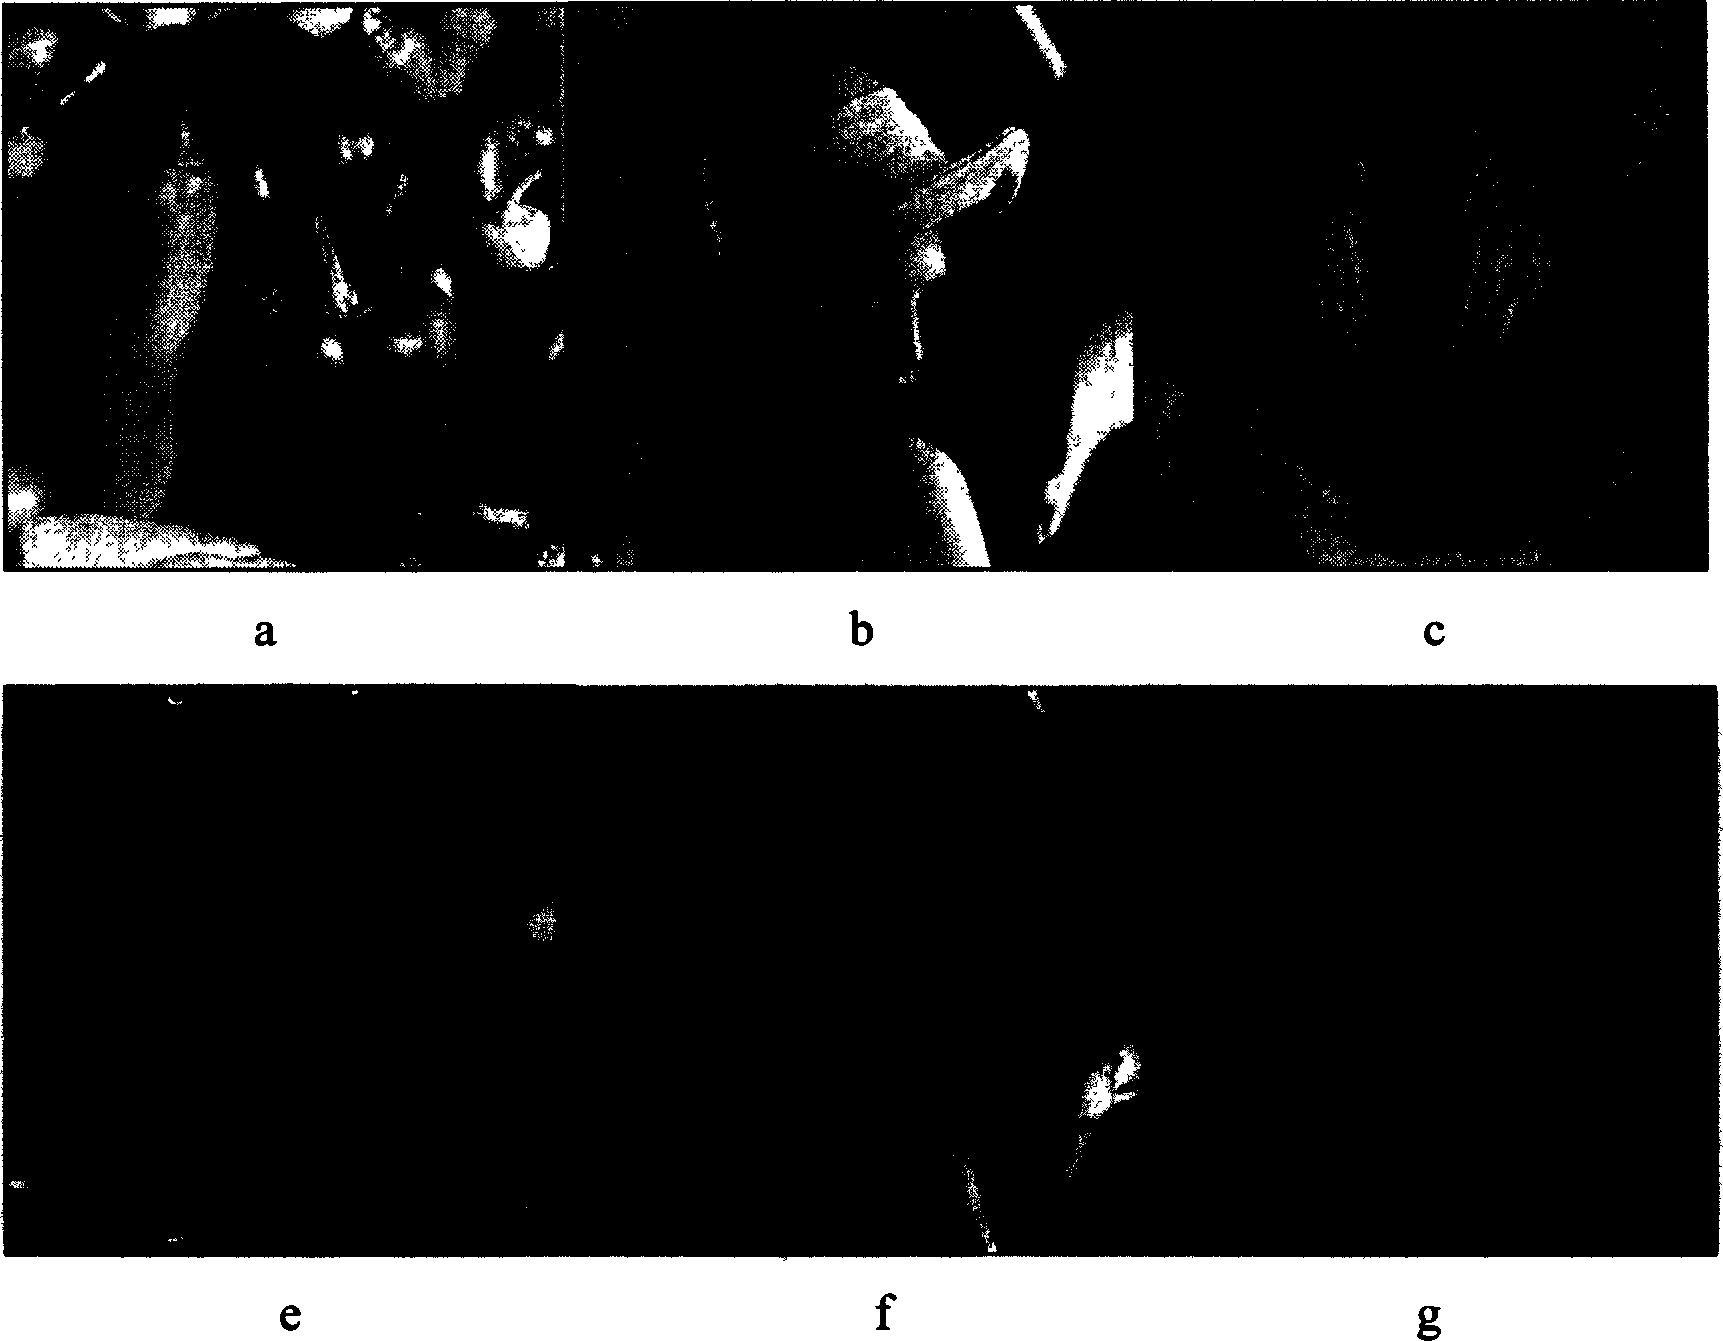 Synchronous self-adaptable watermark method based on image continuity